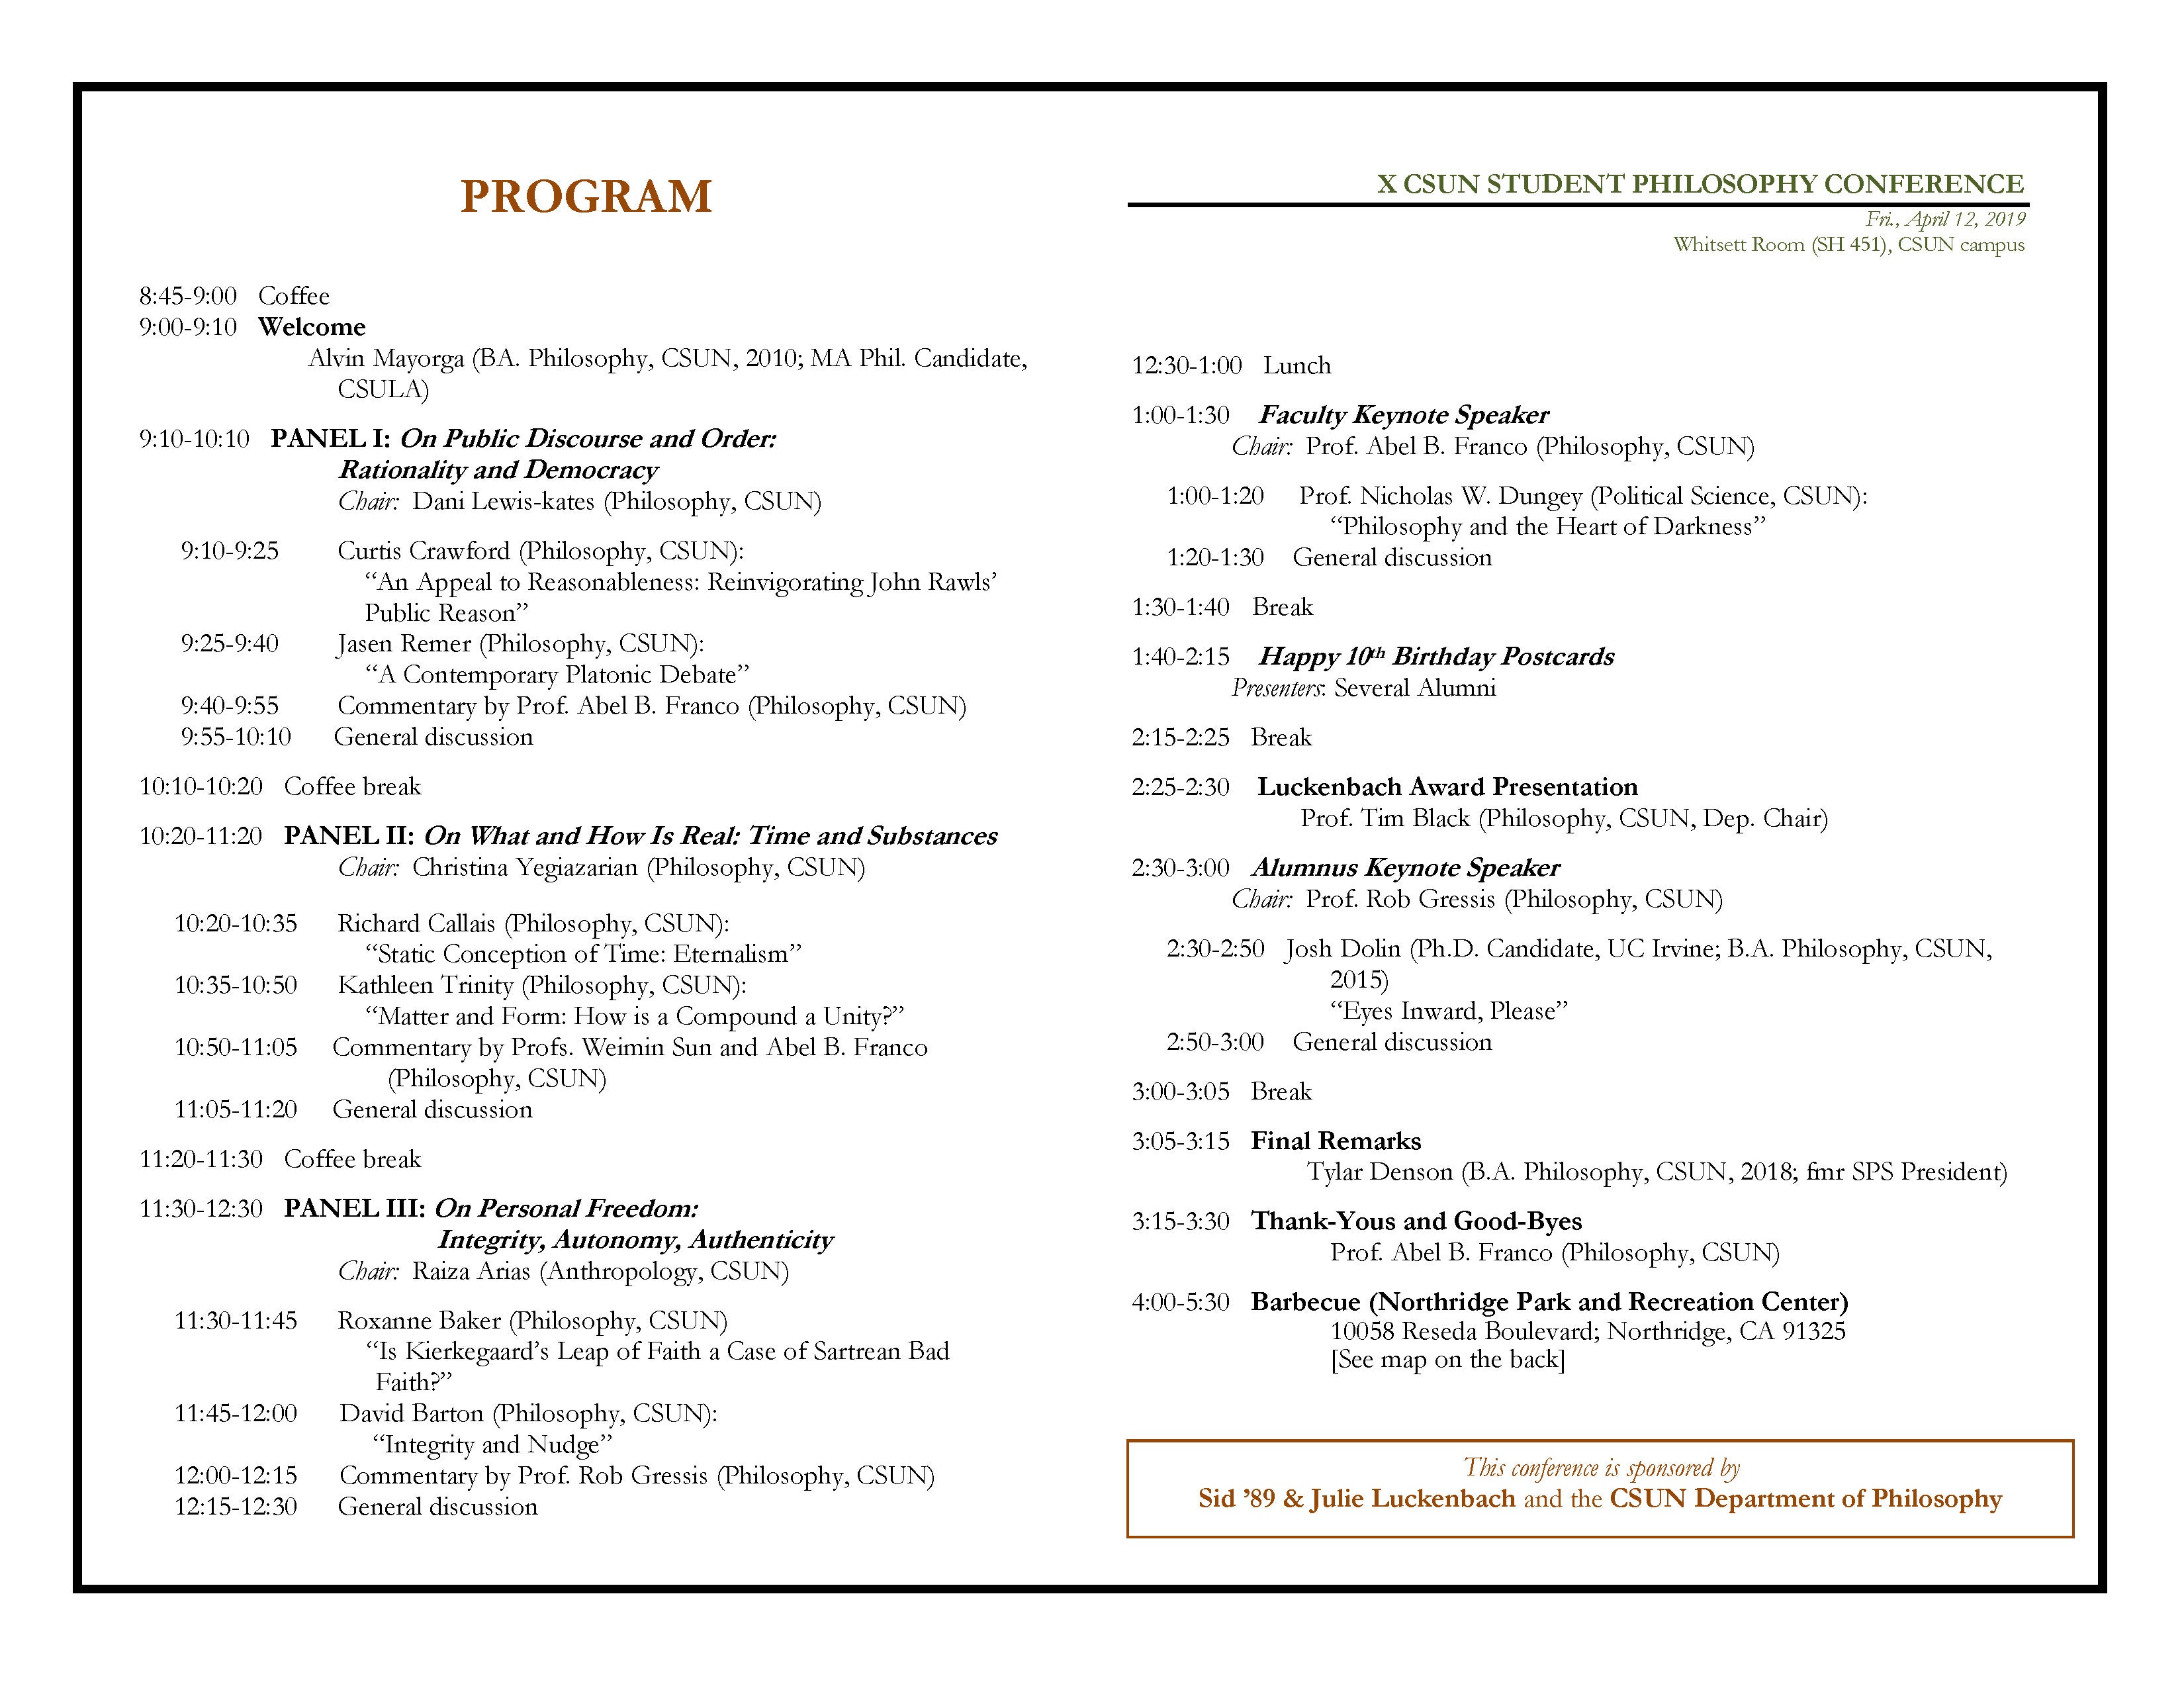 Annual Student Philosophy Conference program